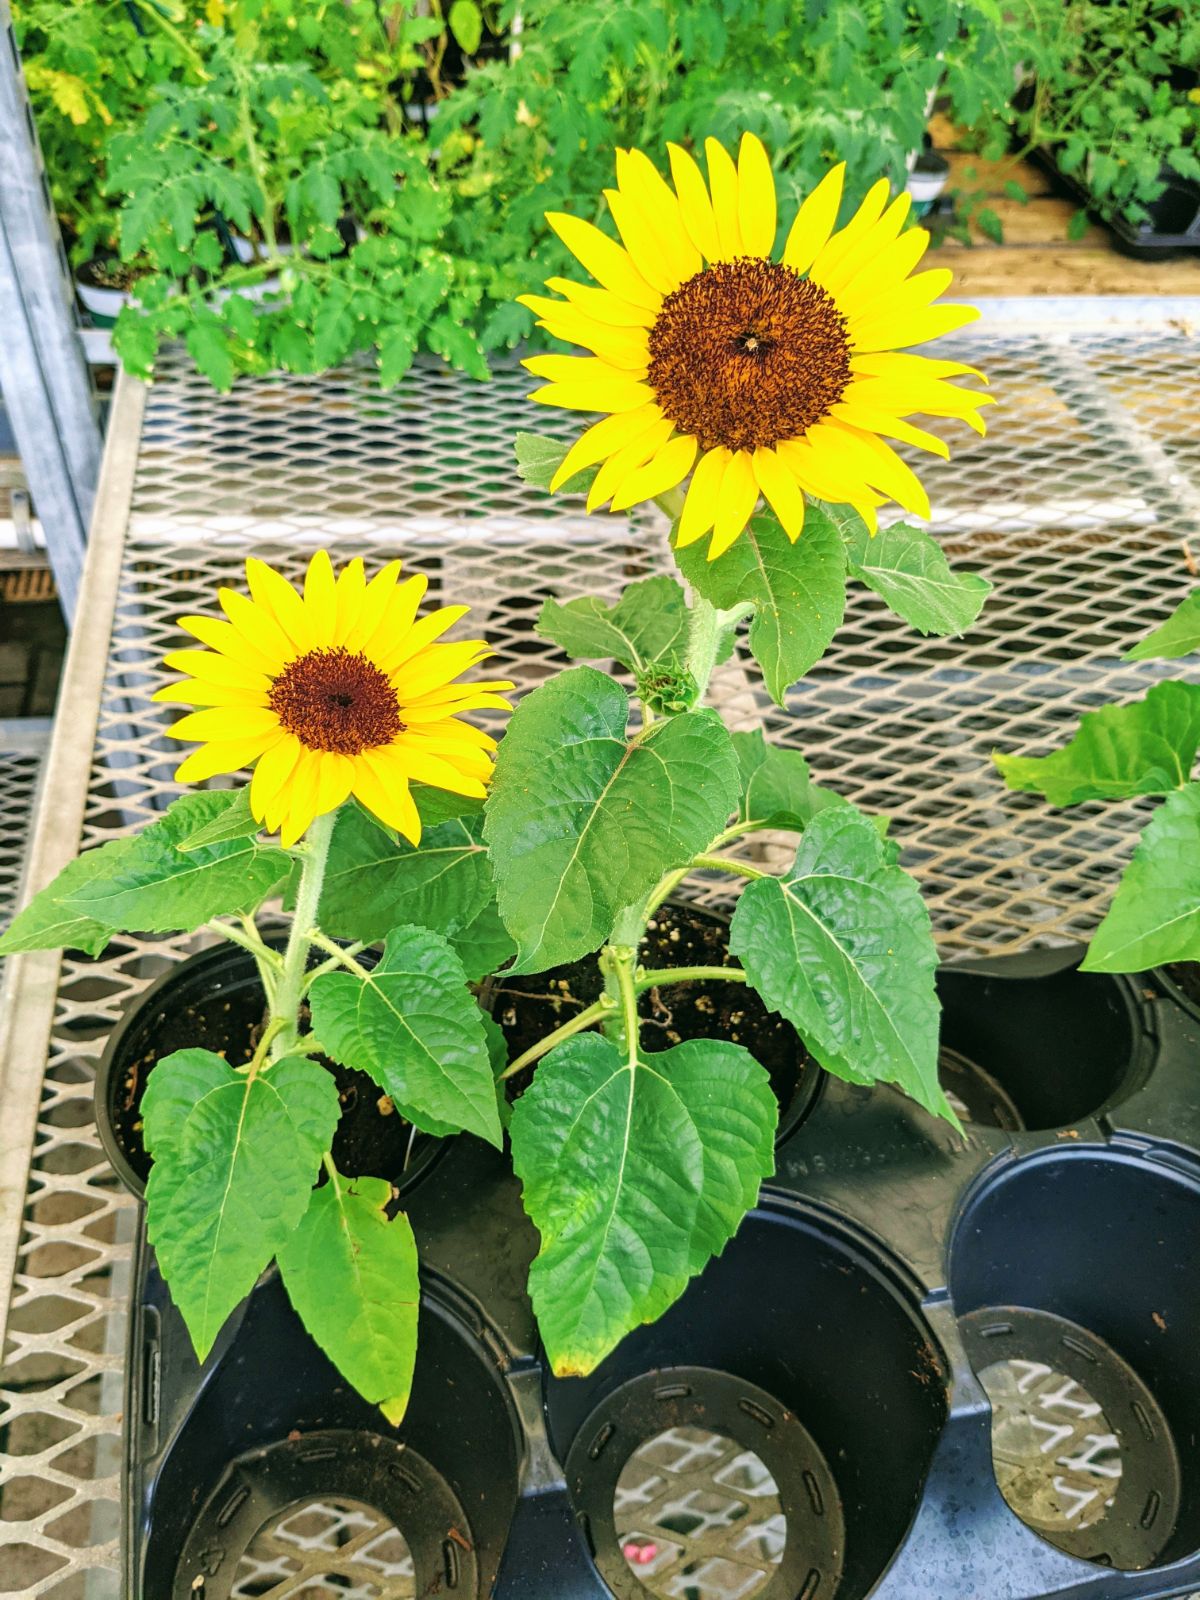 Short sunflowers for sale at a nursery